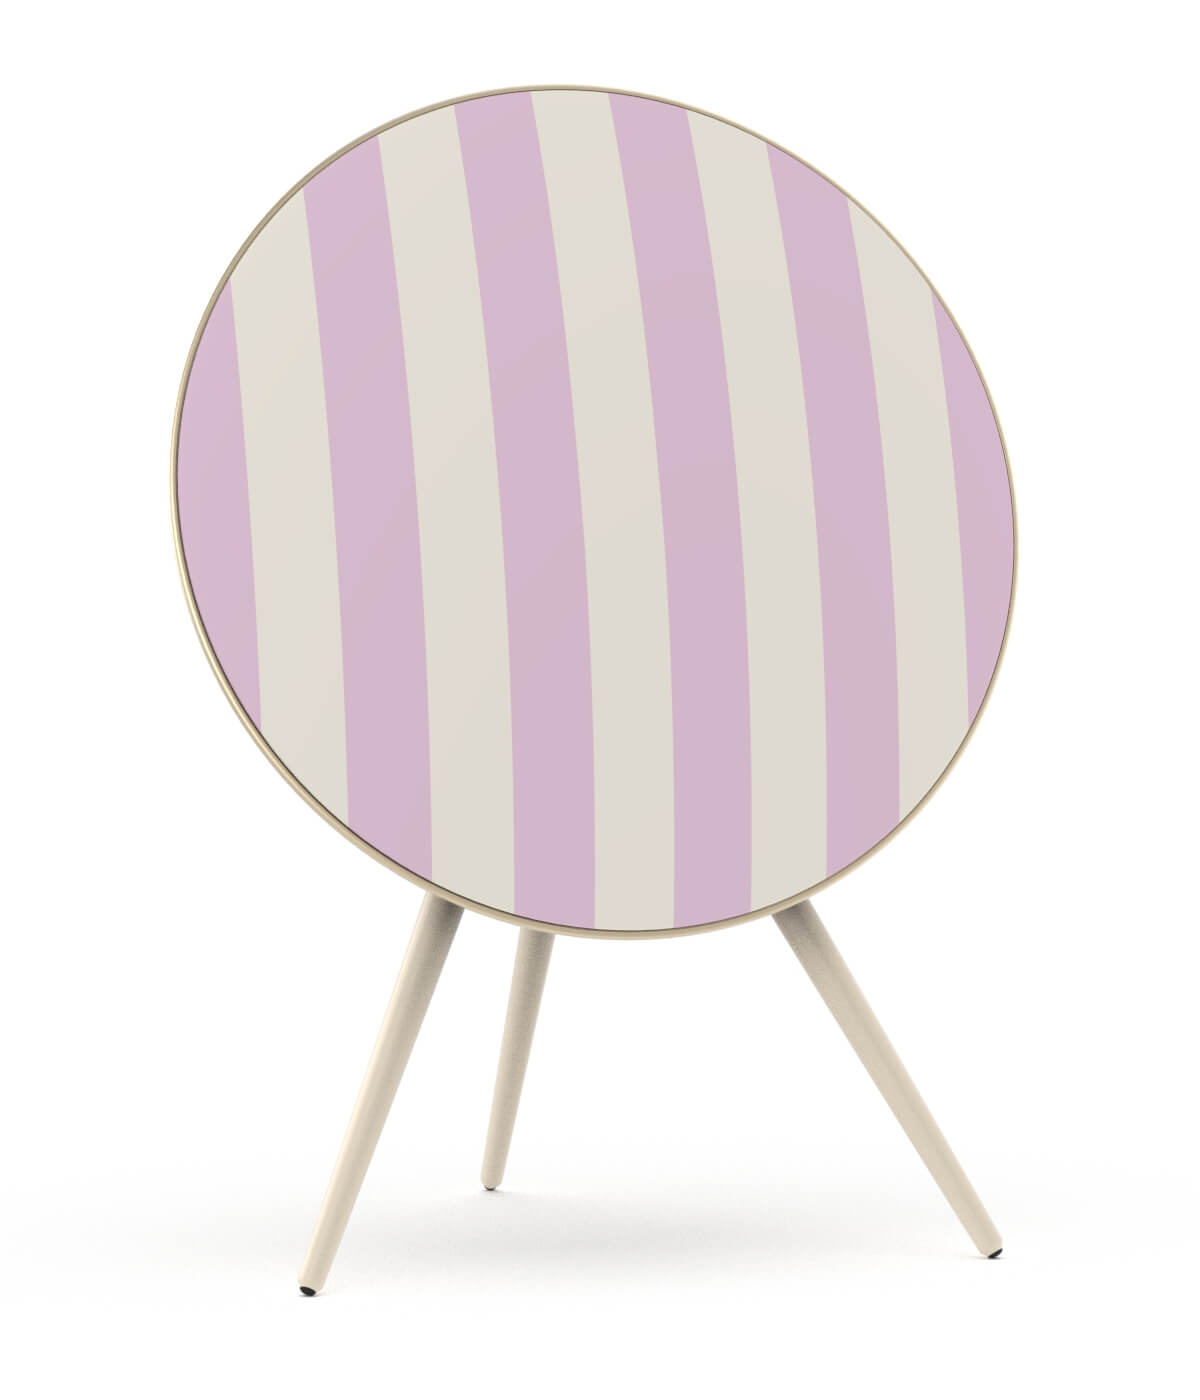 Skiniplay cover La Rose for Bang & Olufsen Beoplay A9 and Beosound A9 speaker